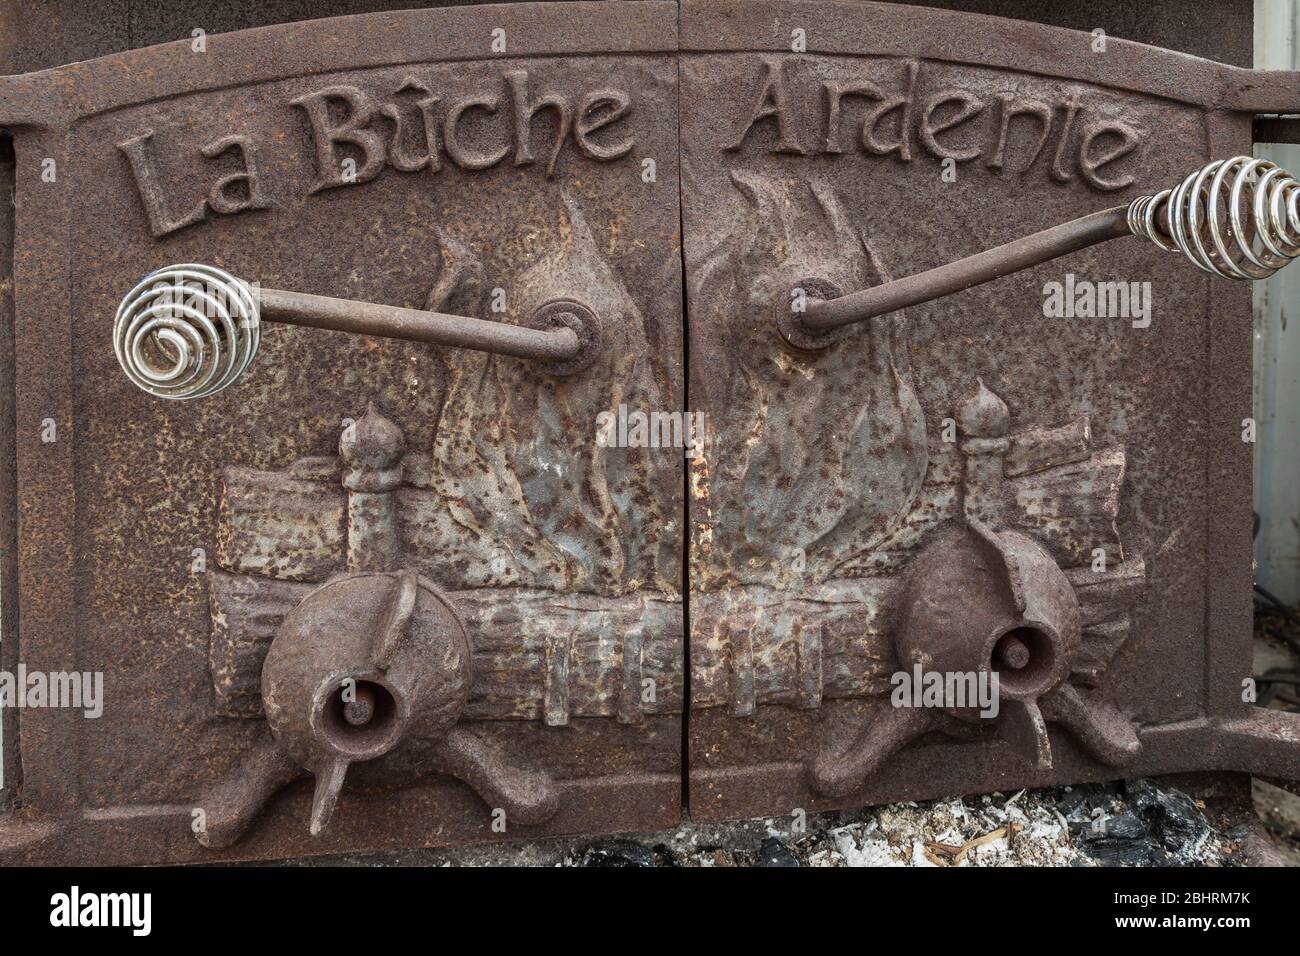 Close-up of rusted doors with silver metal handles on antique La Buche Ardene wood-burning cast, iron fireplace Stock Photo